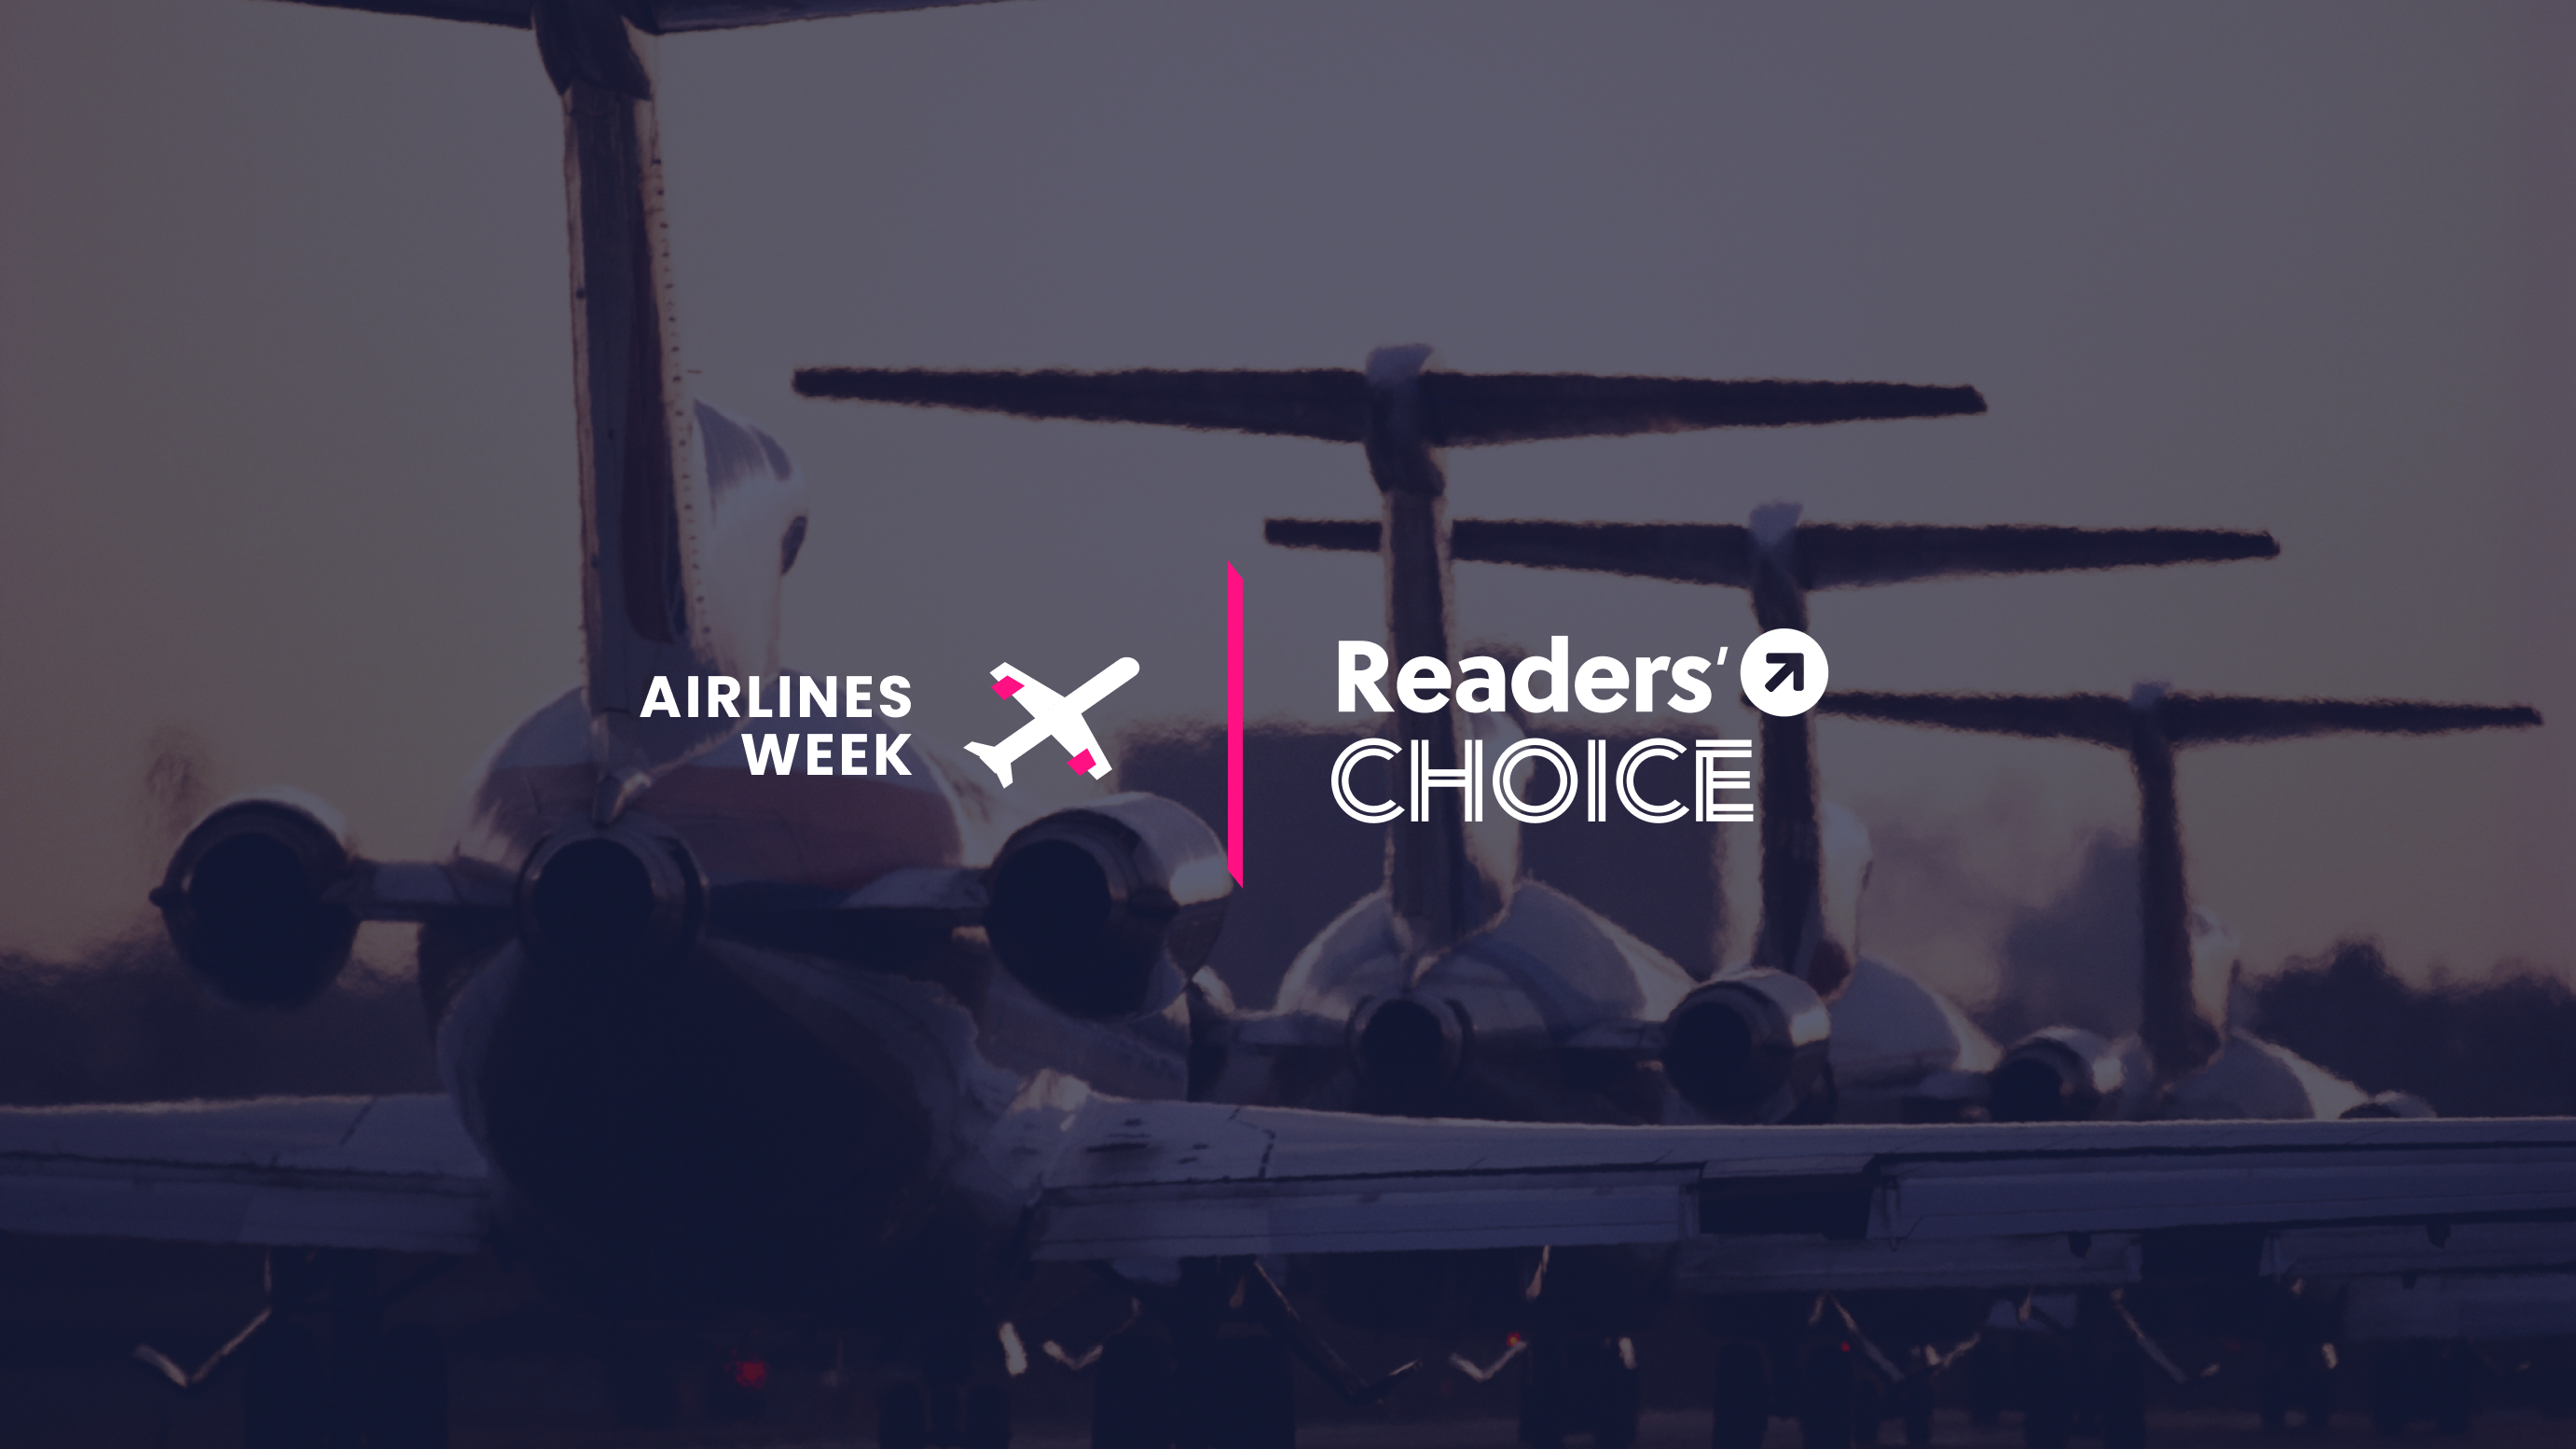 Featured image for readers' choice awards during Airlines Week at the 2021 TPG Awards